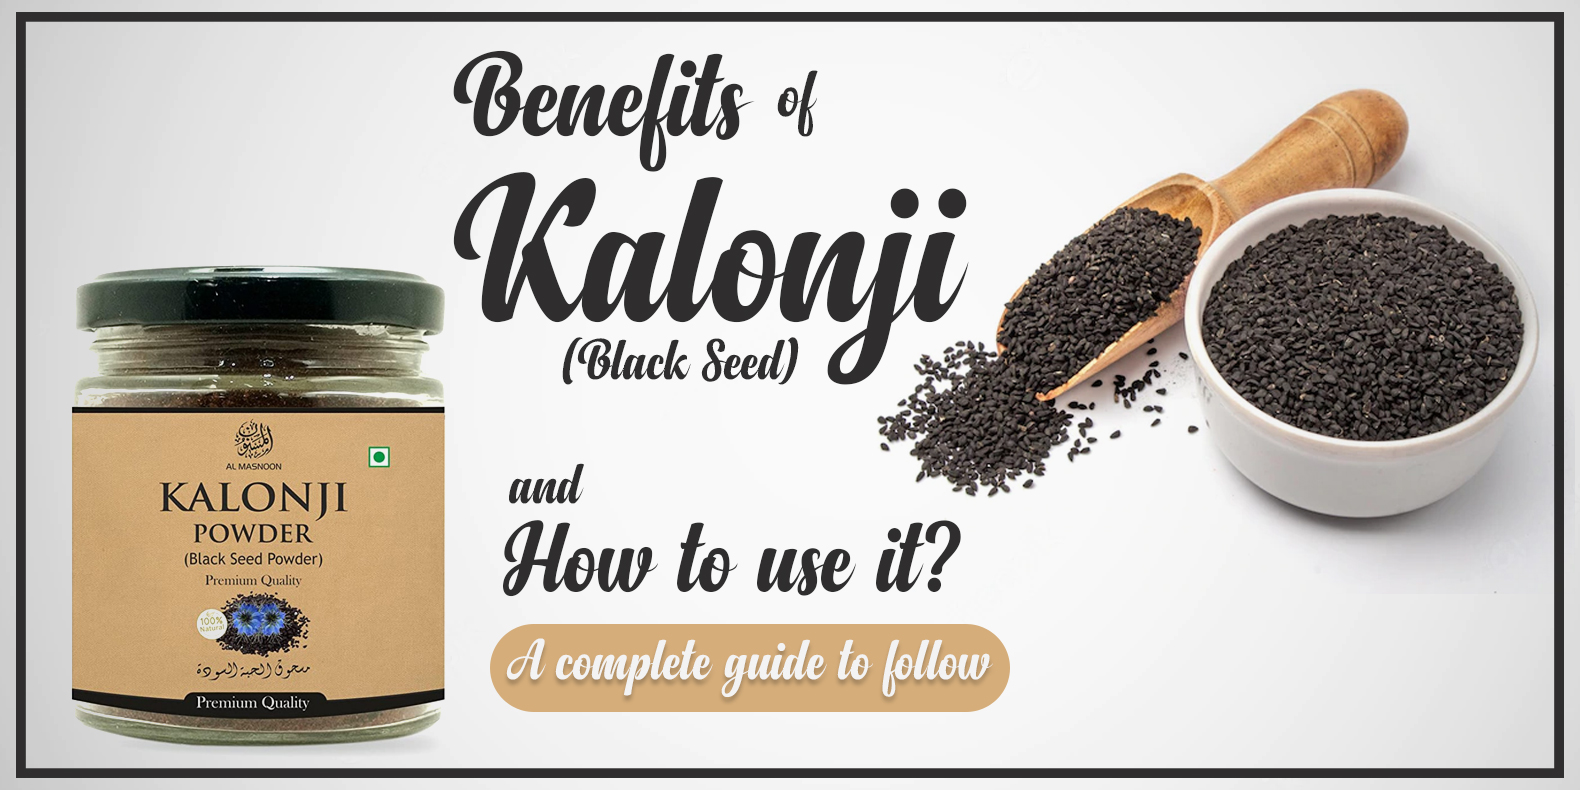 Benefits of Kalonji [Black seed] and How to use it? A complete guide to follow